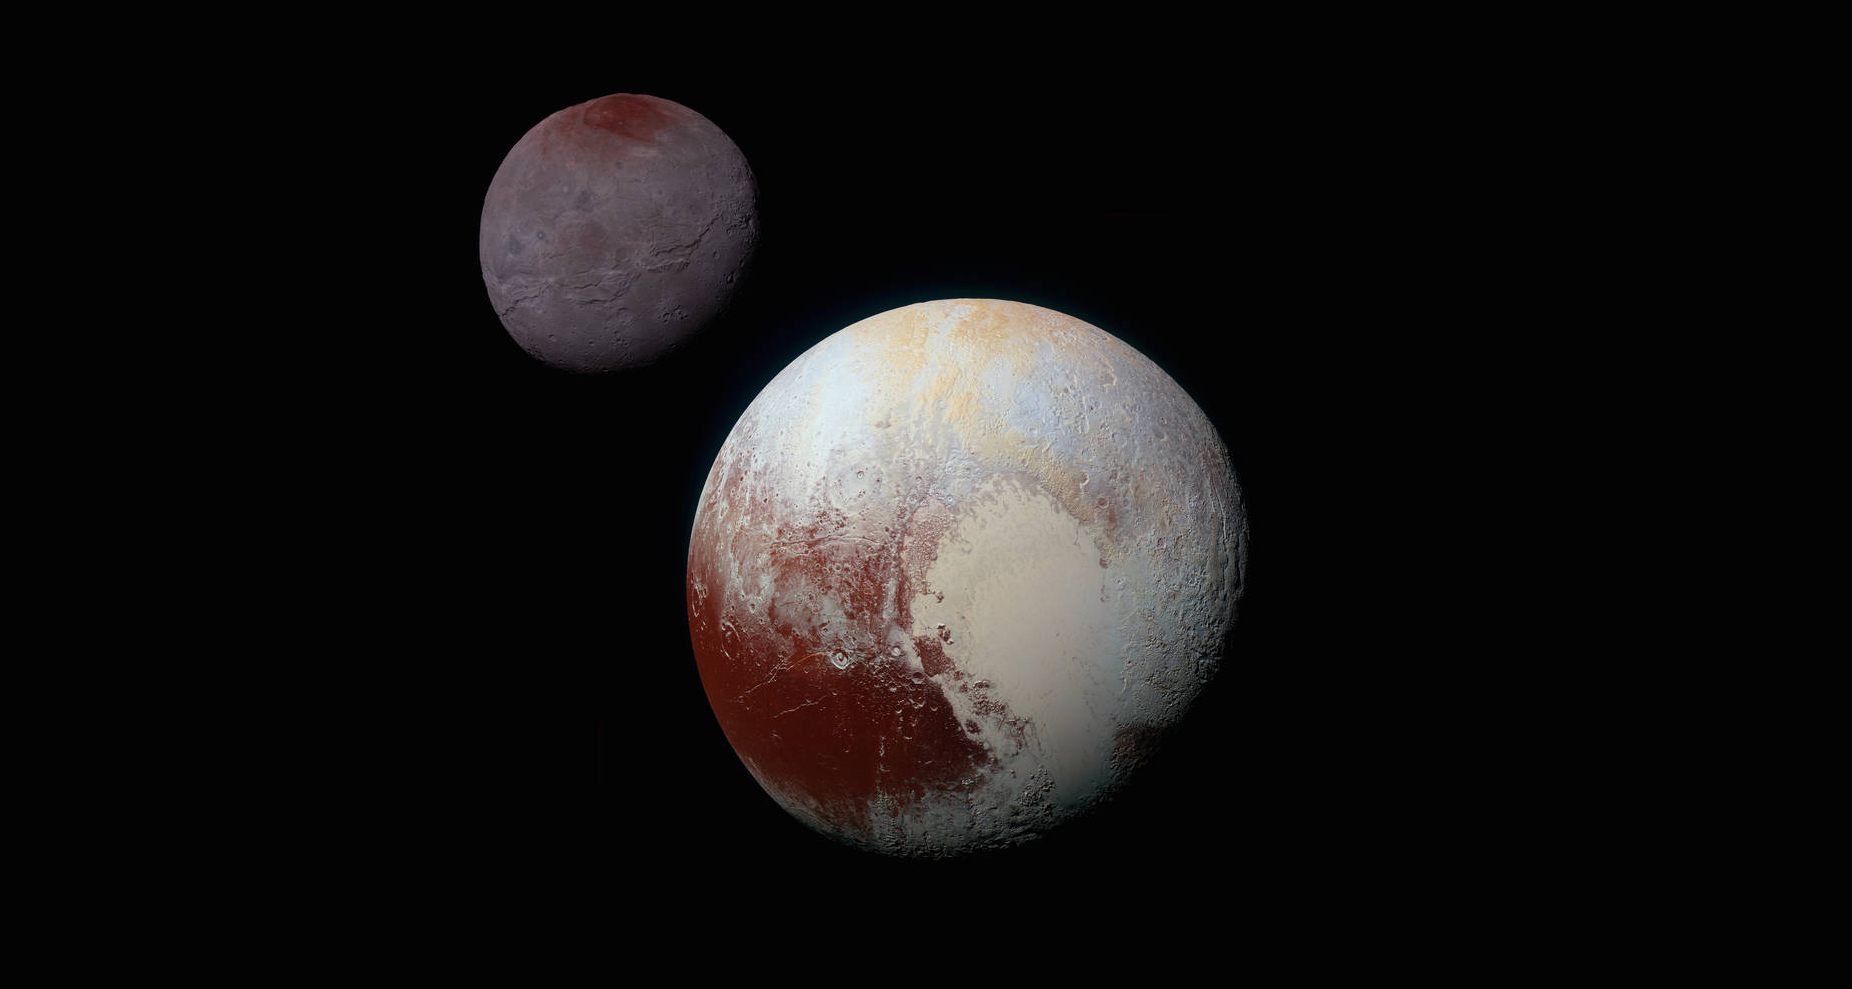 Charon (upper left) and Pluto as seen by New Horizons on July 14, 2015. Photo Credit: NASA/Johns Hopkins University Applied Physics Laboratory/Southwest Research Institute